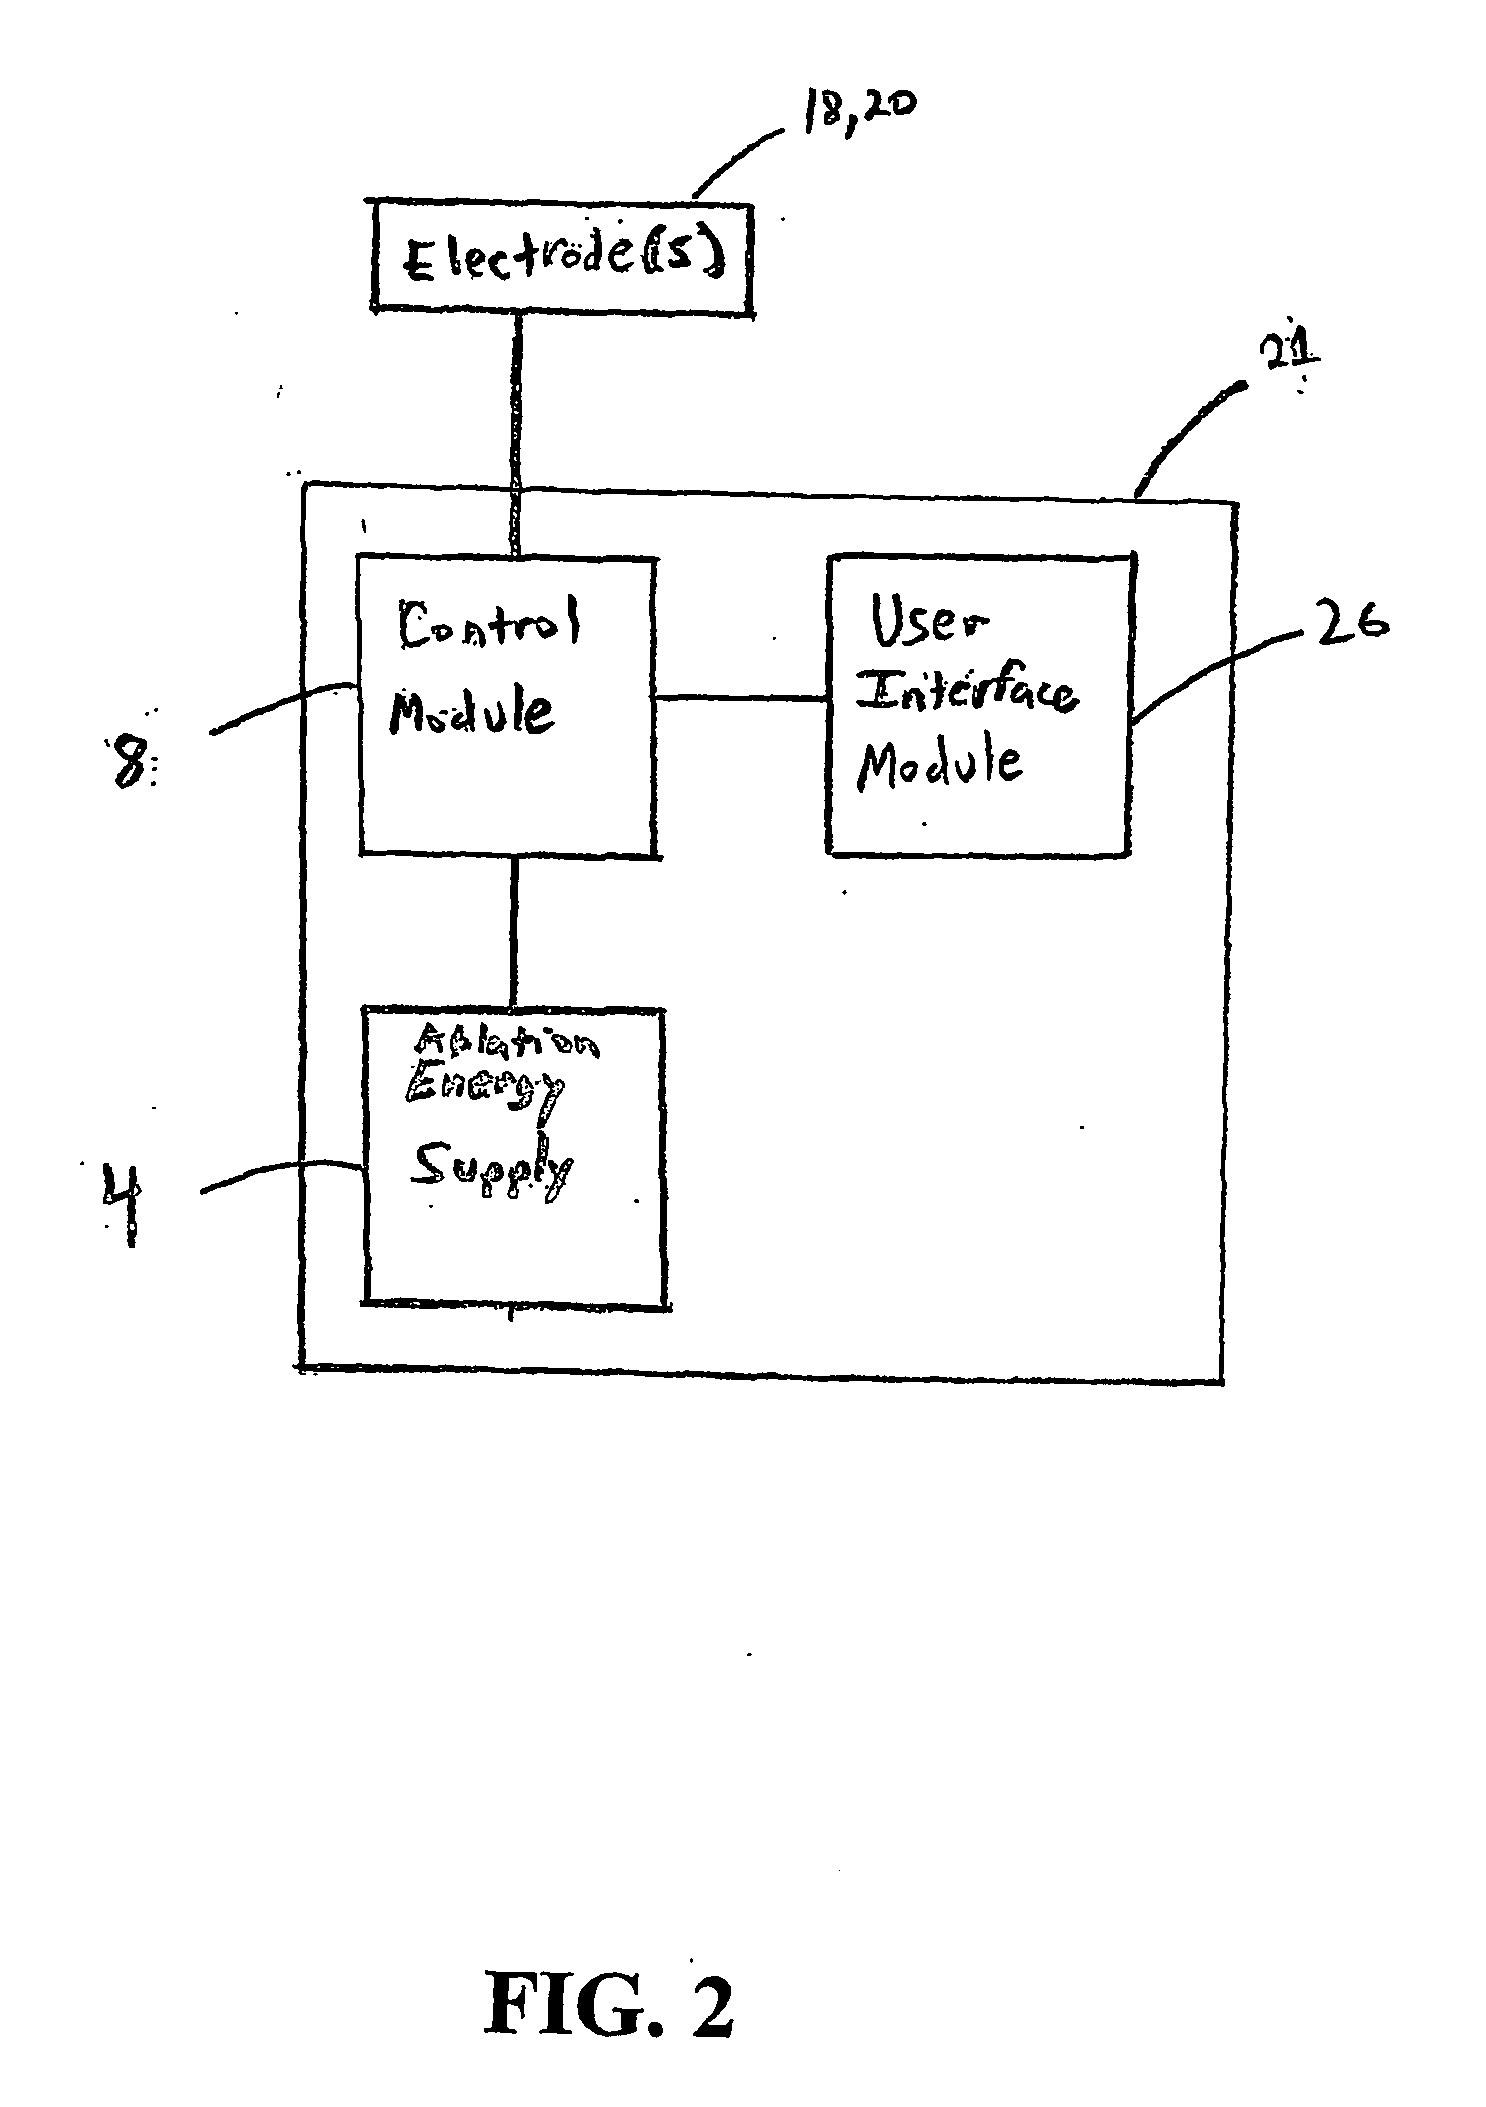 Method and apparatus for selecting operating parameter values in electrophysiology procedures